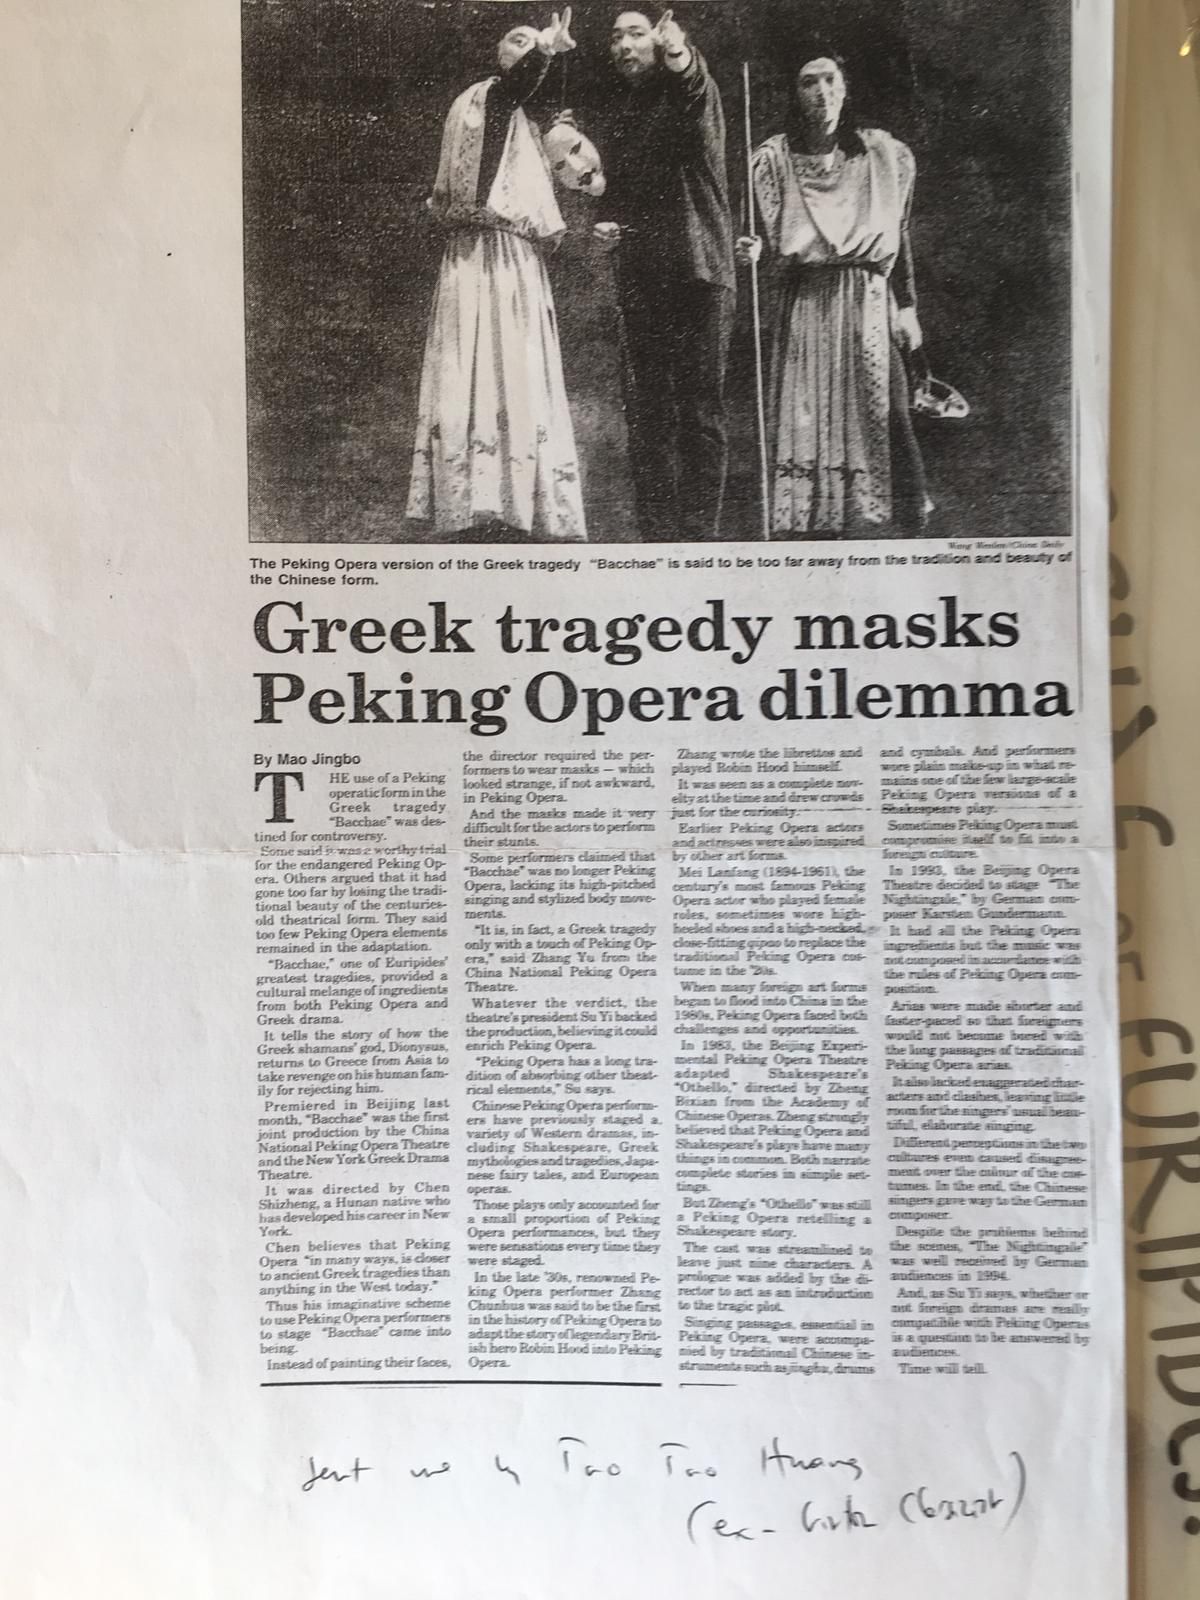 Review of operatic production of the Bacchae directed by Chen Shizheng; headline reads: Greek tragedy masks Peking Opera dilemma; China Daily, 5 April 1996